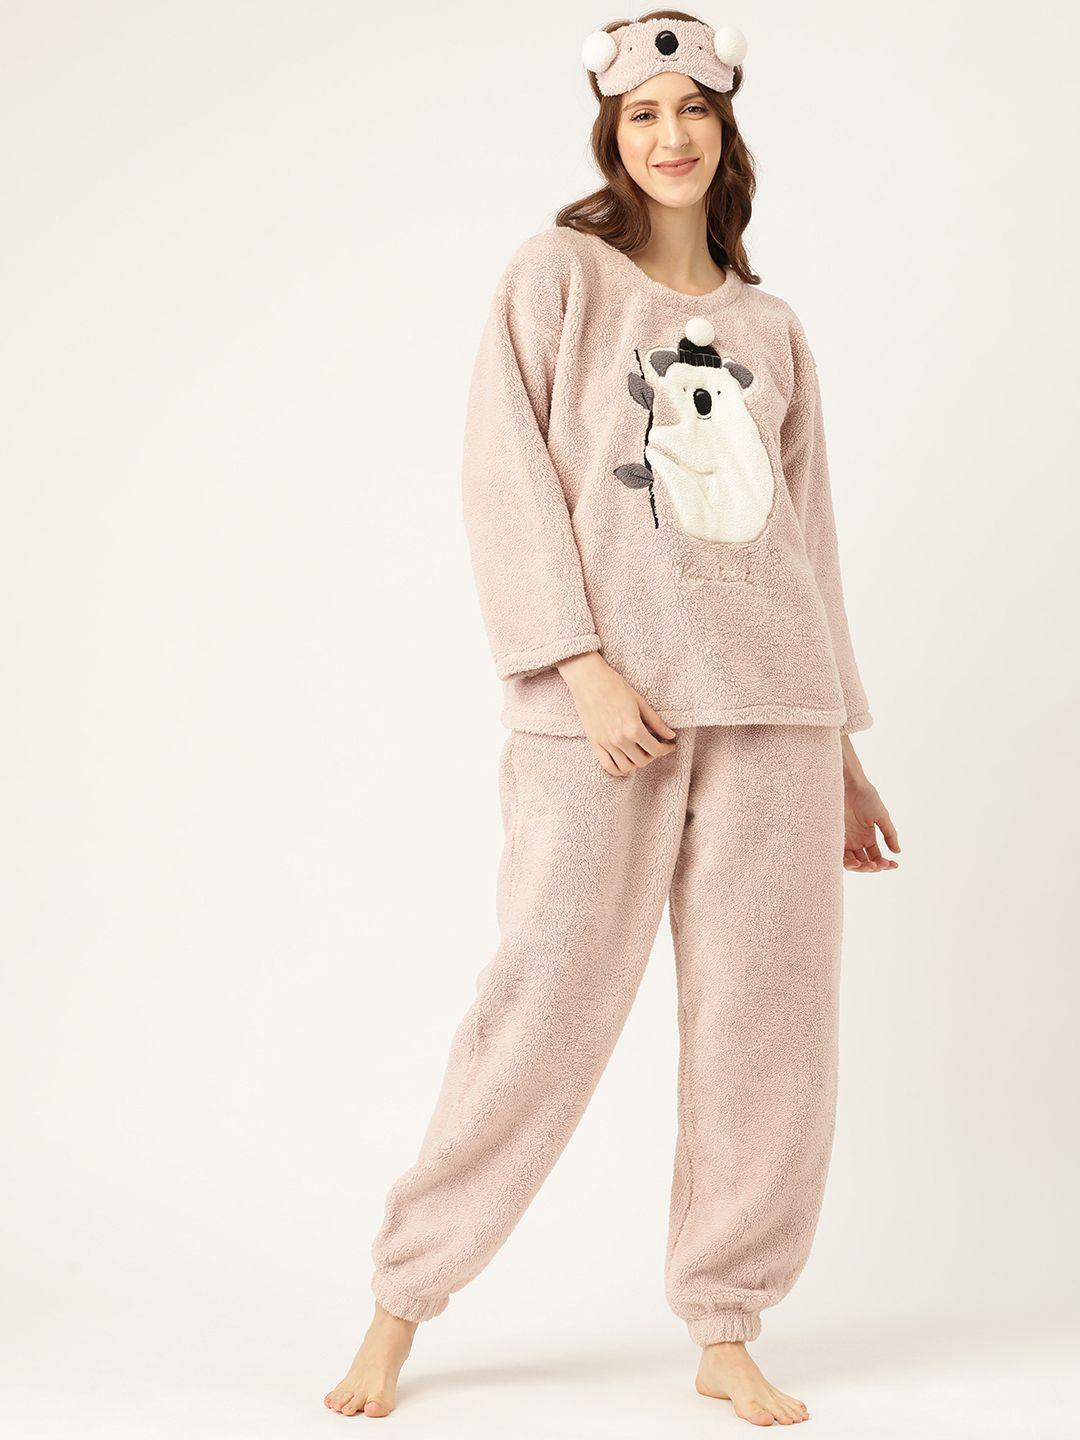 lill women peach-coloured applique detail fleece winter night suit with eye mask